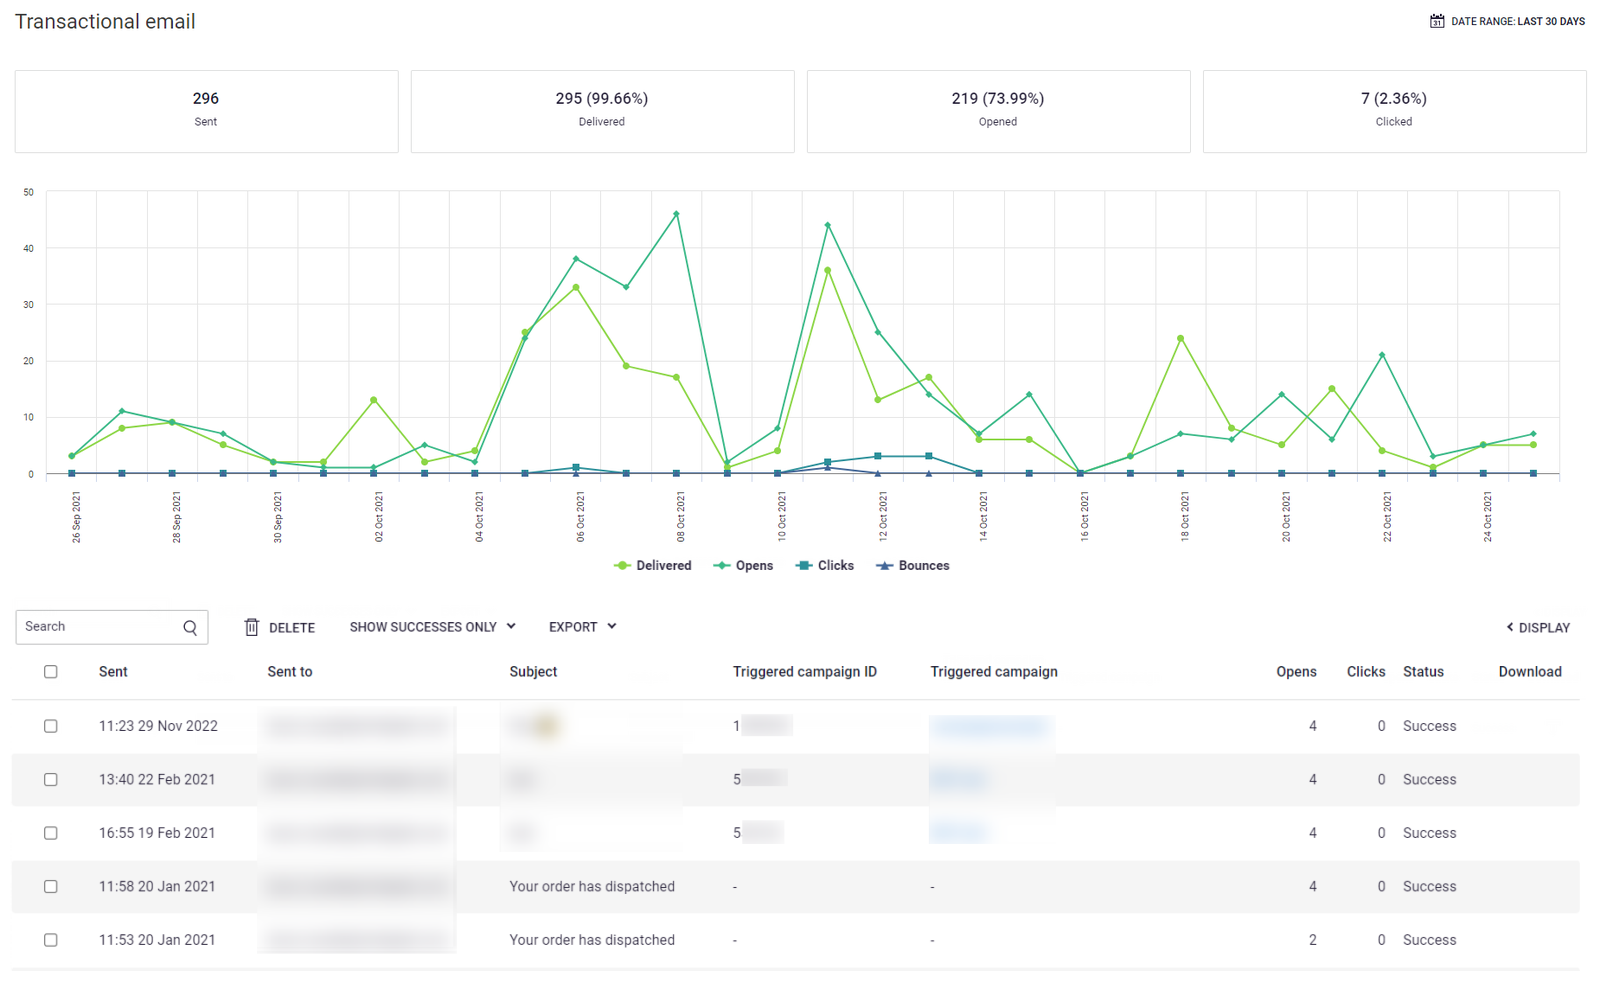 The transactional email dashboard